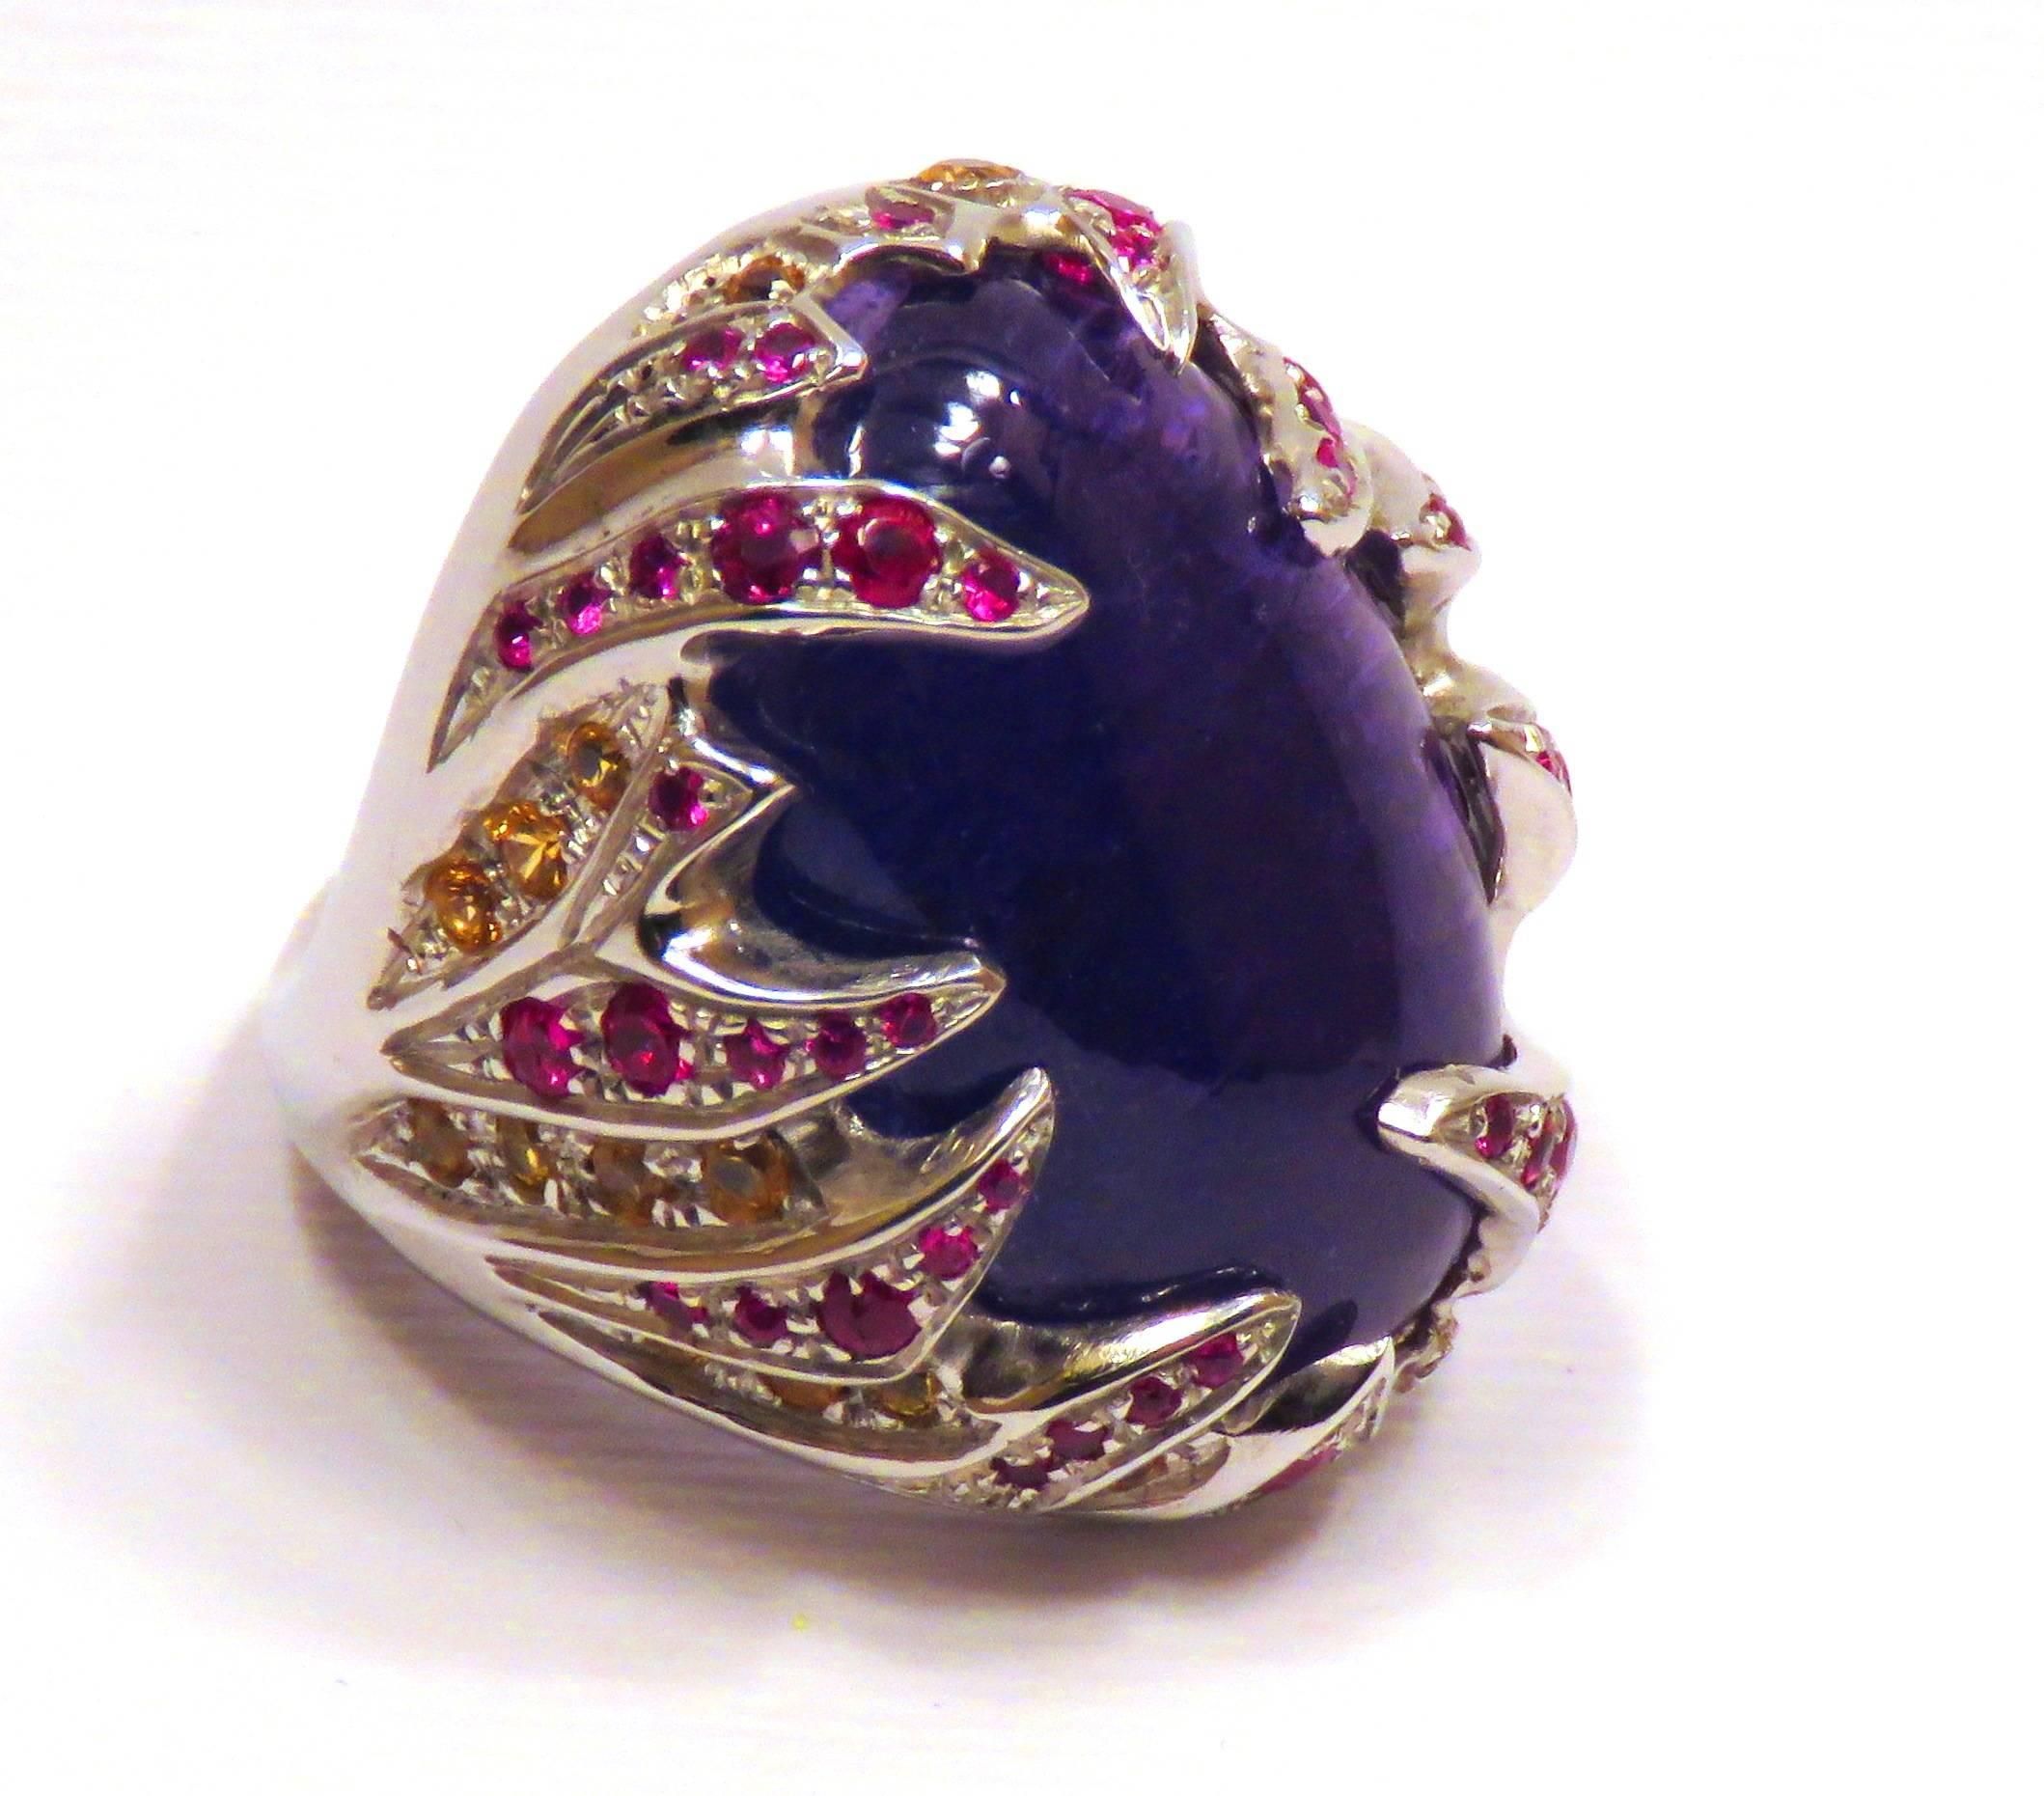 Cabochon Tanzanite Rubies Yellow Sapphires 18 Karat White Gold Cocktail Ring Handcrafted For Sale